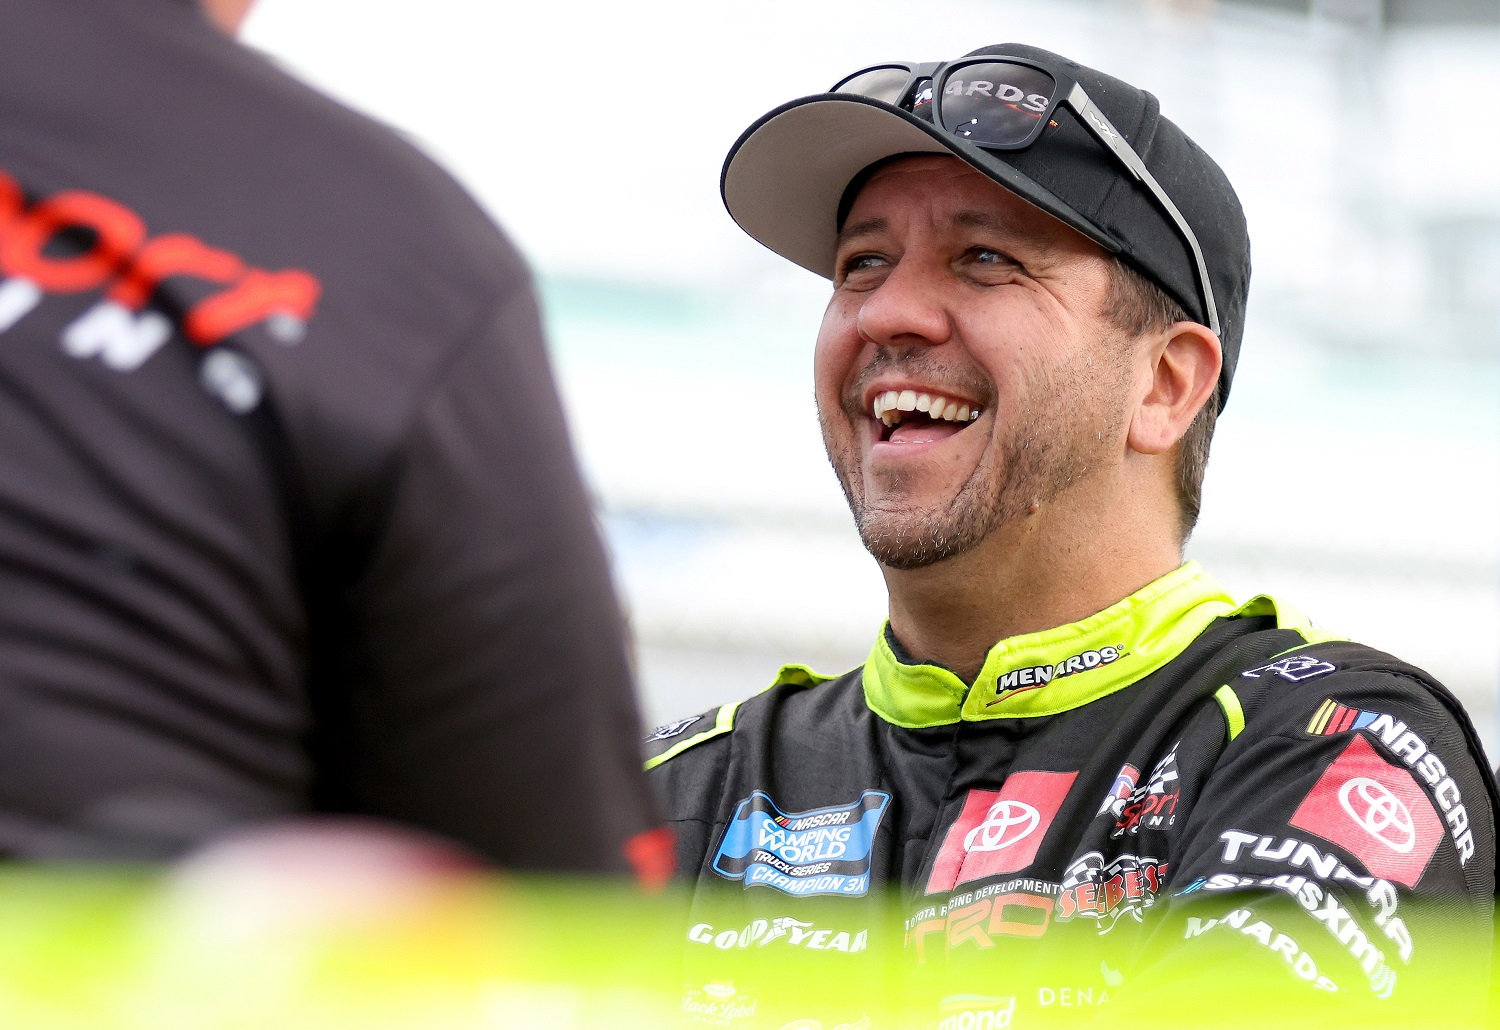 Matt Crafton shares a laugh with his crew on the grid during qualifying for the NASCAR Camping World Truck Series Baptist Health 200 at Homestead-Miami Speedway on Oct. 21, 2022.